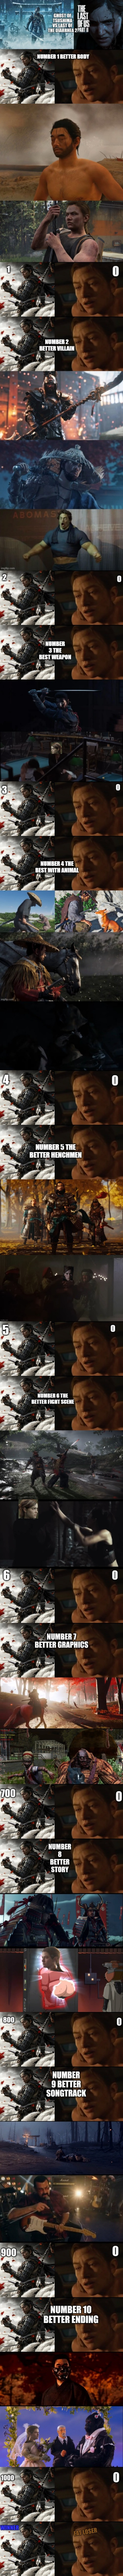 Ghost of tsushima is better than last of diarrhea part 2 | image tagged in google,facebook,instagram,youtube,twitter,video games | made w/ Imgflip meme maker